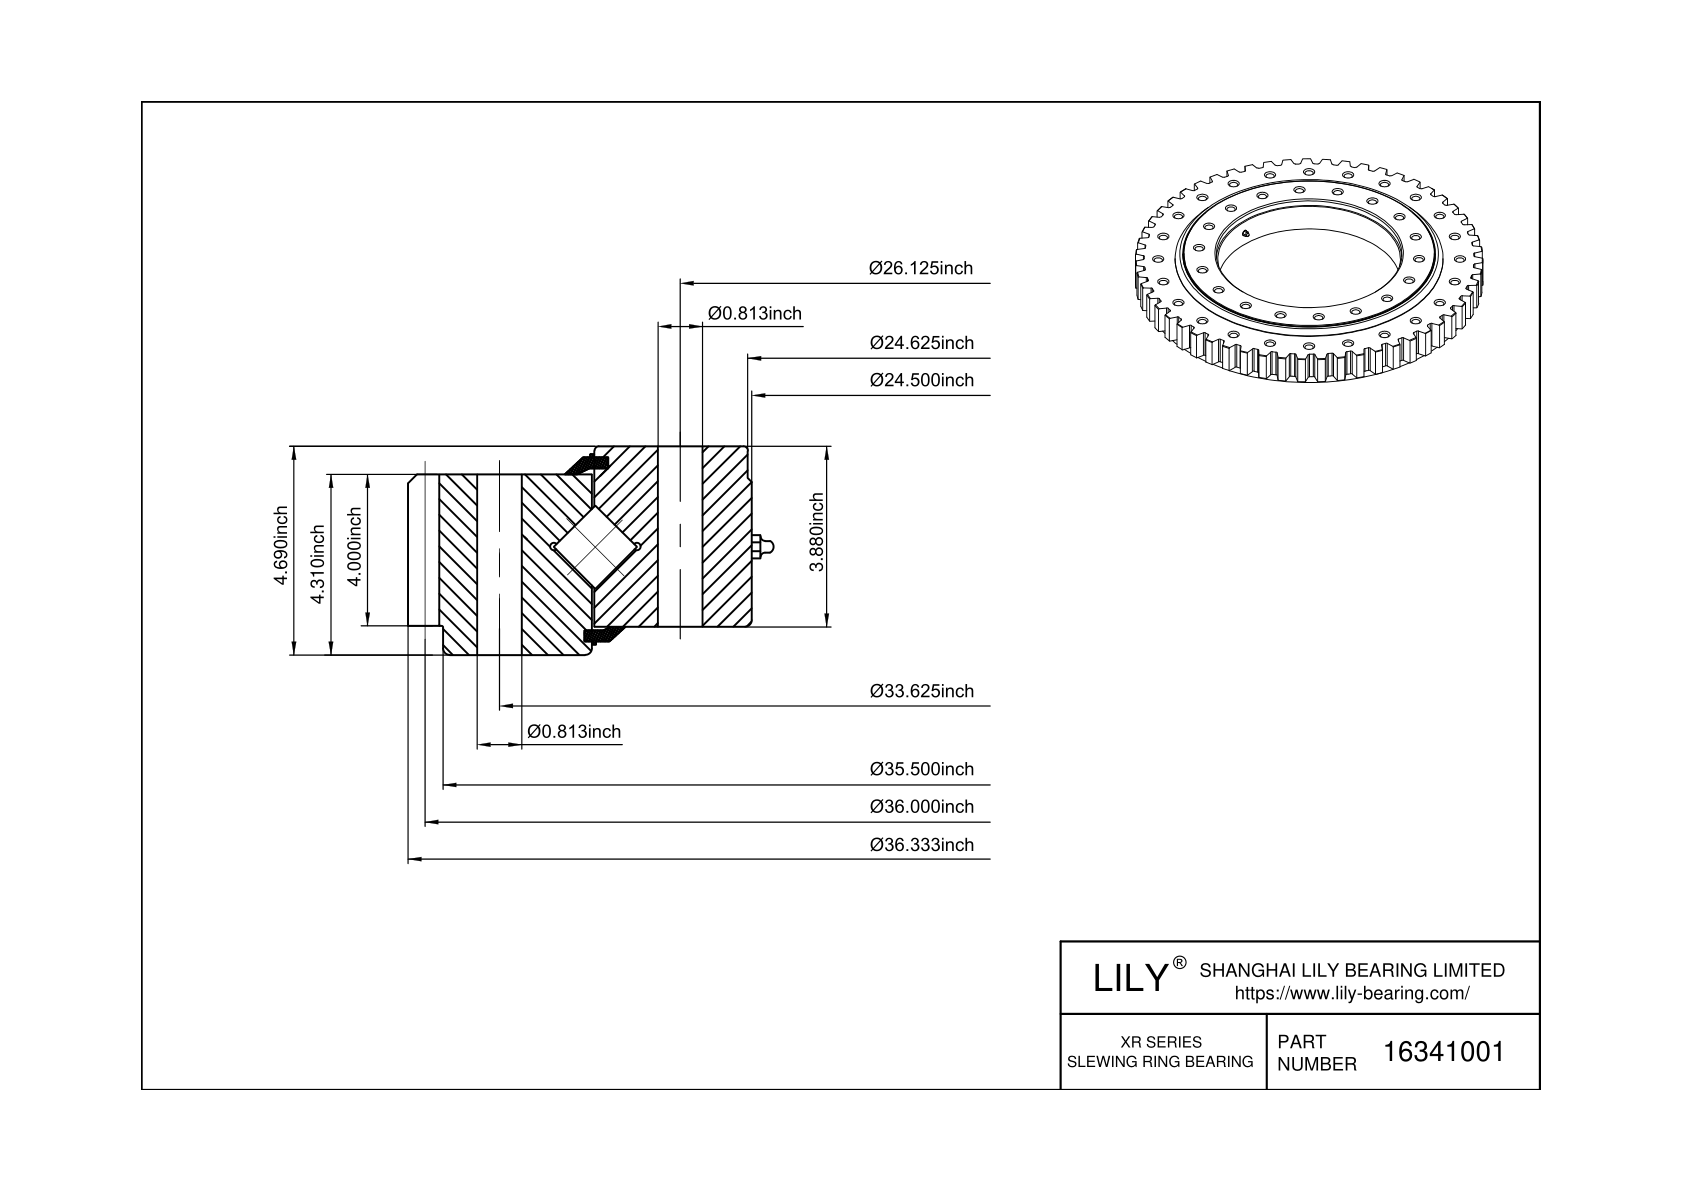 16341001 Cross Roller Slewing Ring Bearing cad drawing